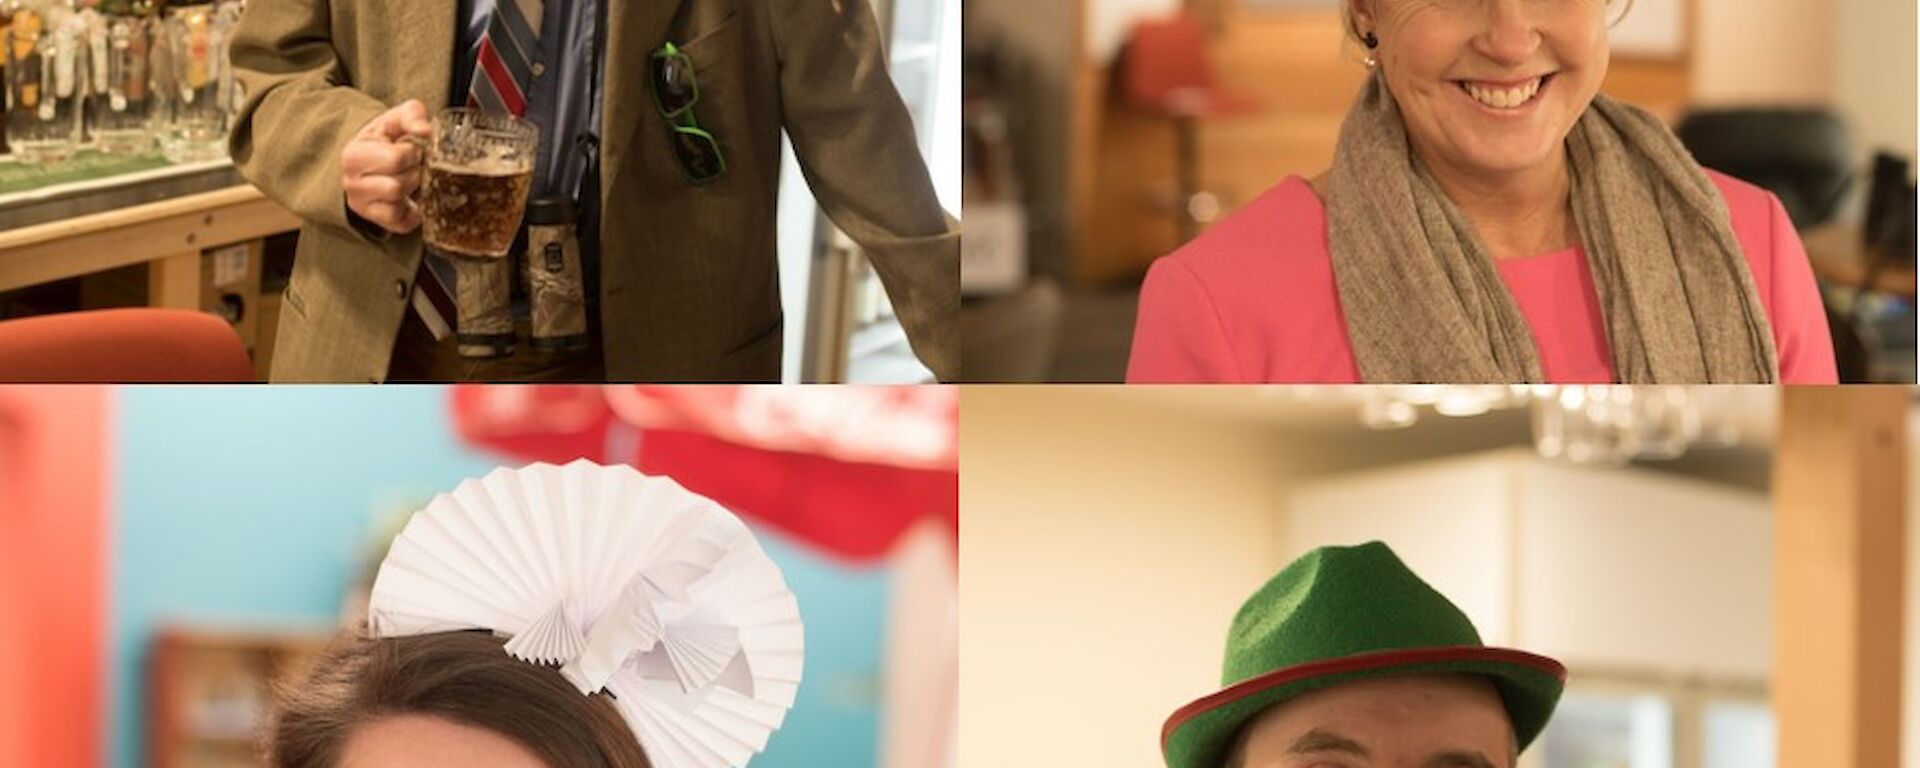 Four portrait shots of race goers, men in jackets tie and hats, women in facinators (one a red box with windows down the side to look like the Casey living quarters building)